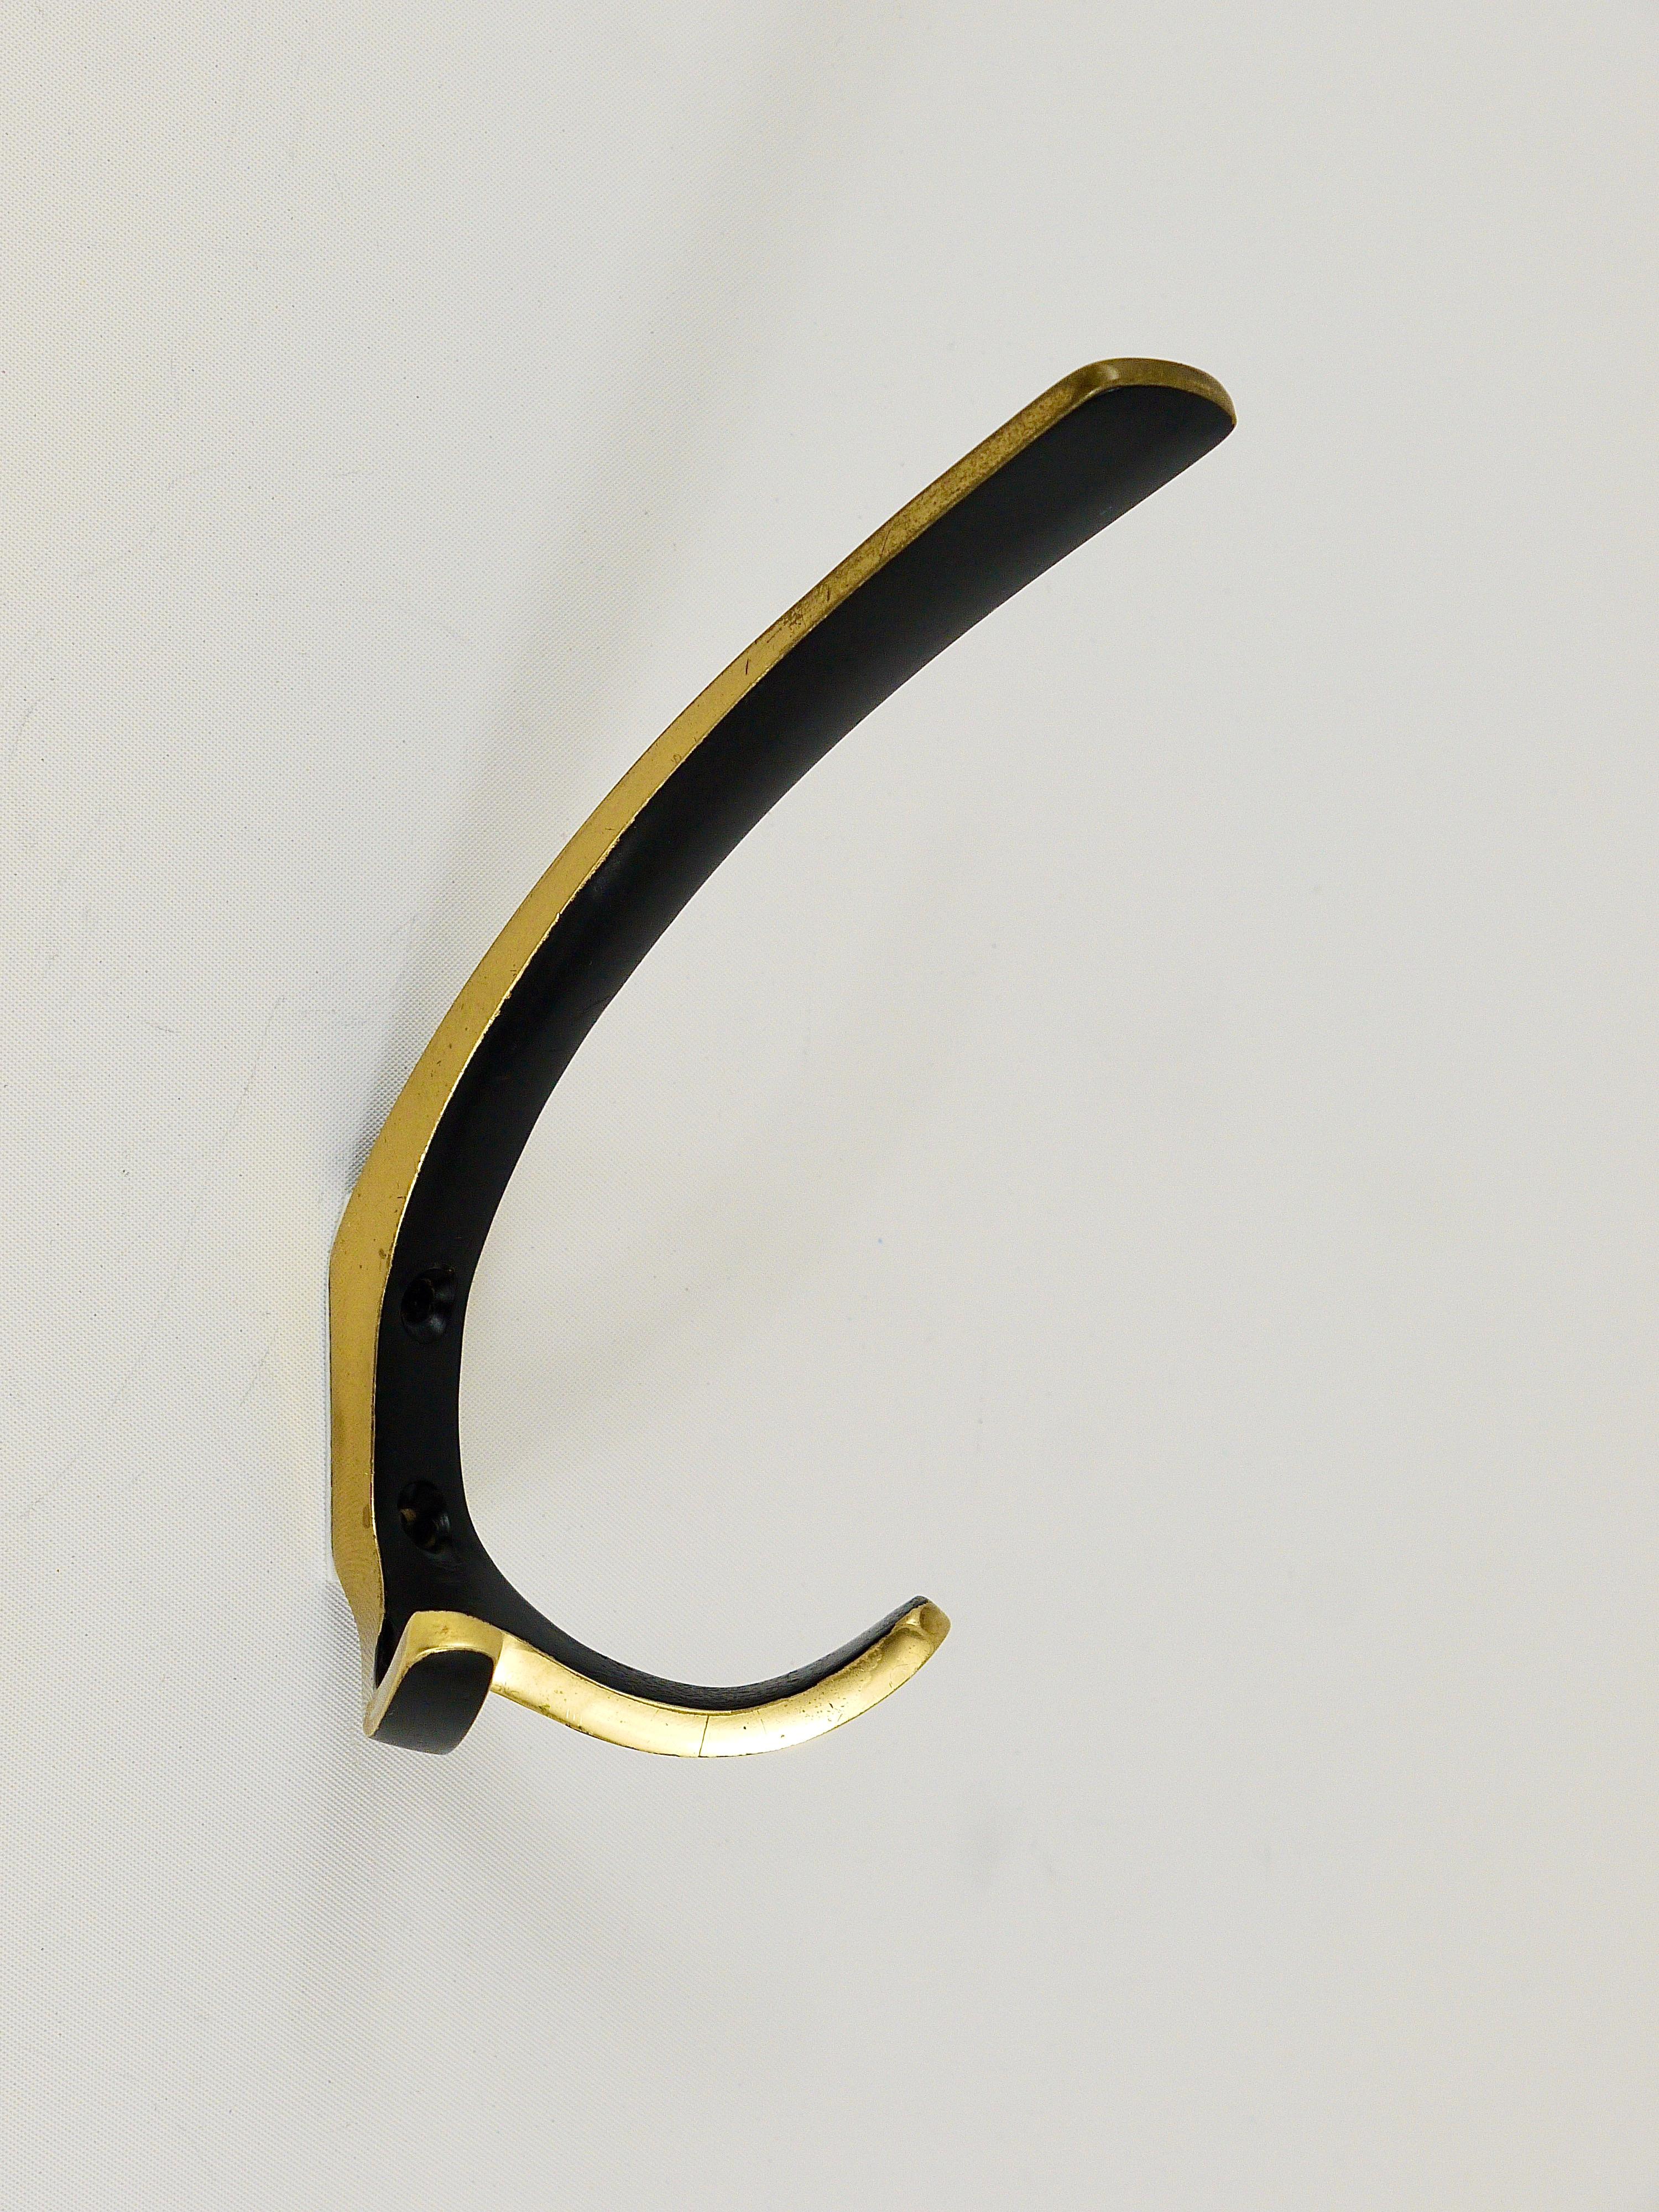 Austrian Up to 10 Midcentury Brass Double Wall Hooks by Herta Baller, Austria, 1950s For Sale